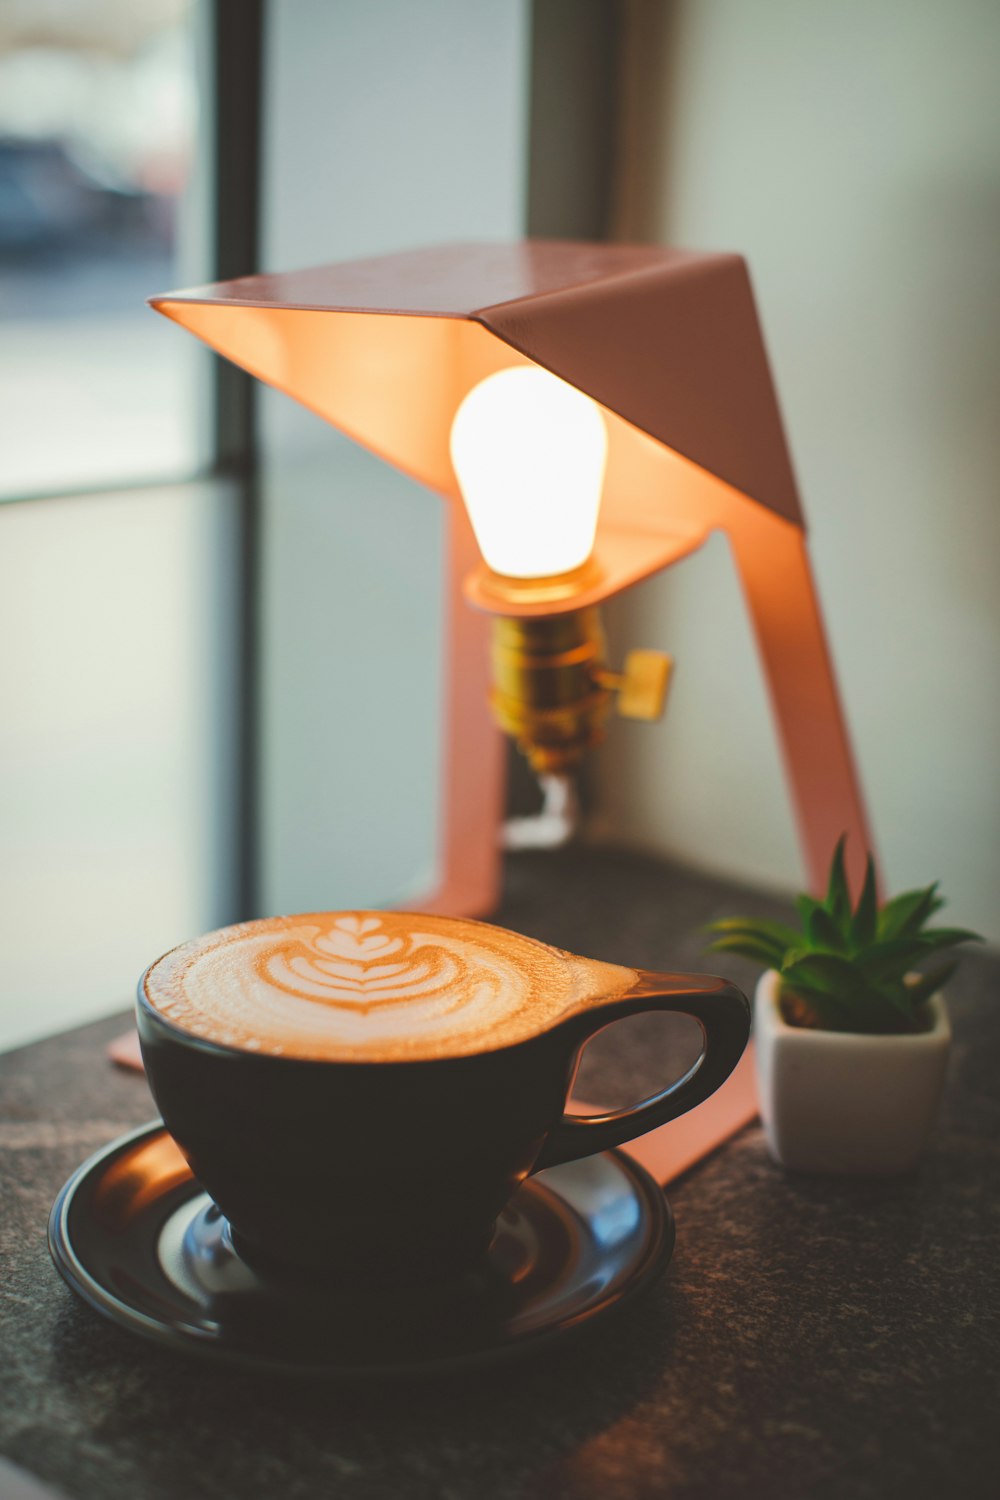 cup of cappuccino near table lamp